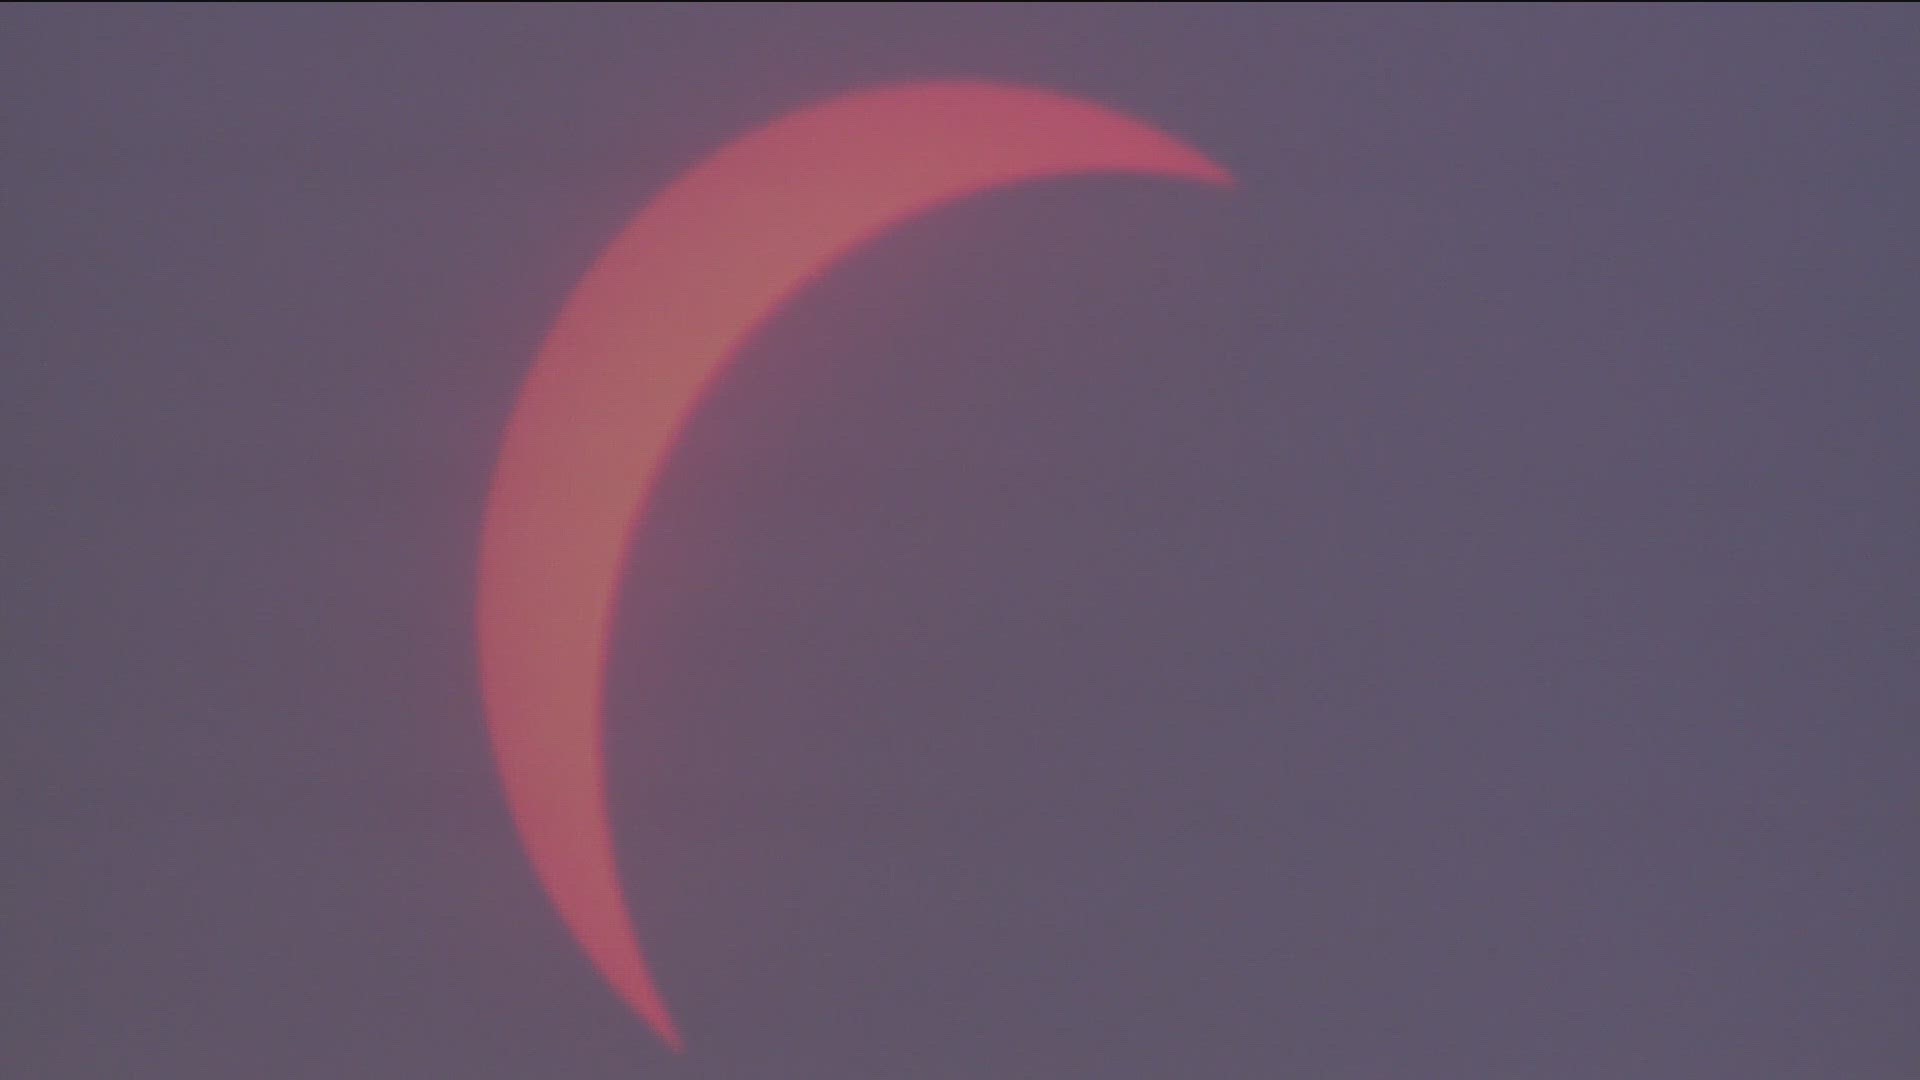 KARE 11’s Gordon Severson traveled to Winona State University to catch a quick view of Monday’s solar eclipse.